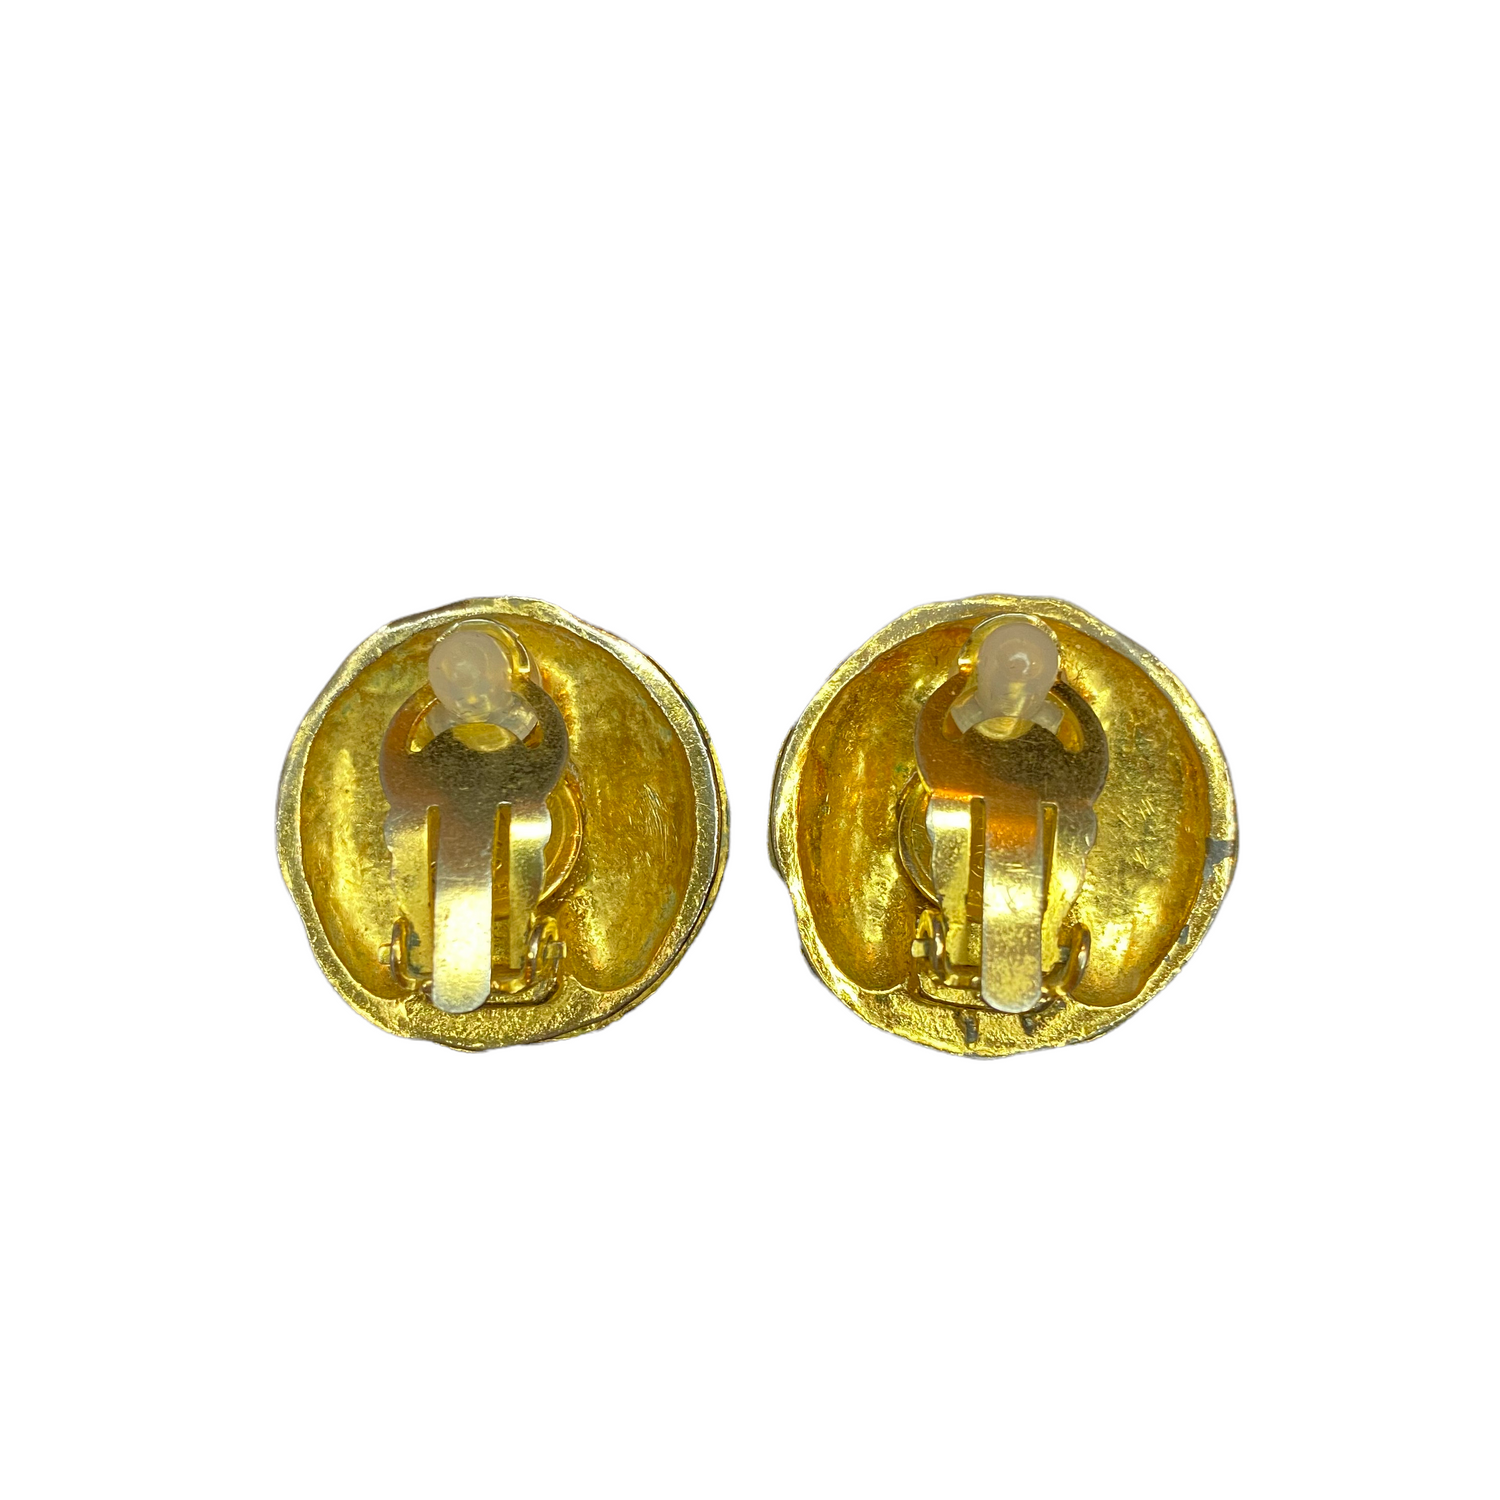 Lysis vintage Chanel vintage clip earrings round   - 1990s